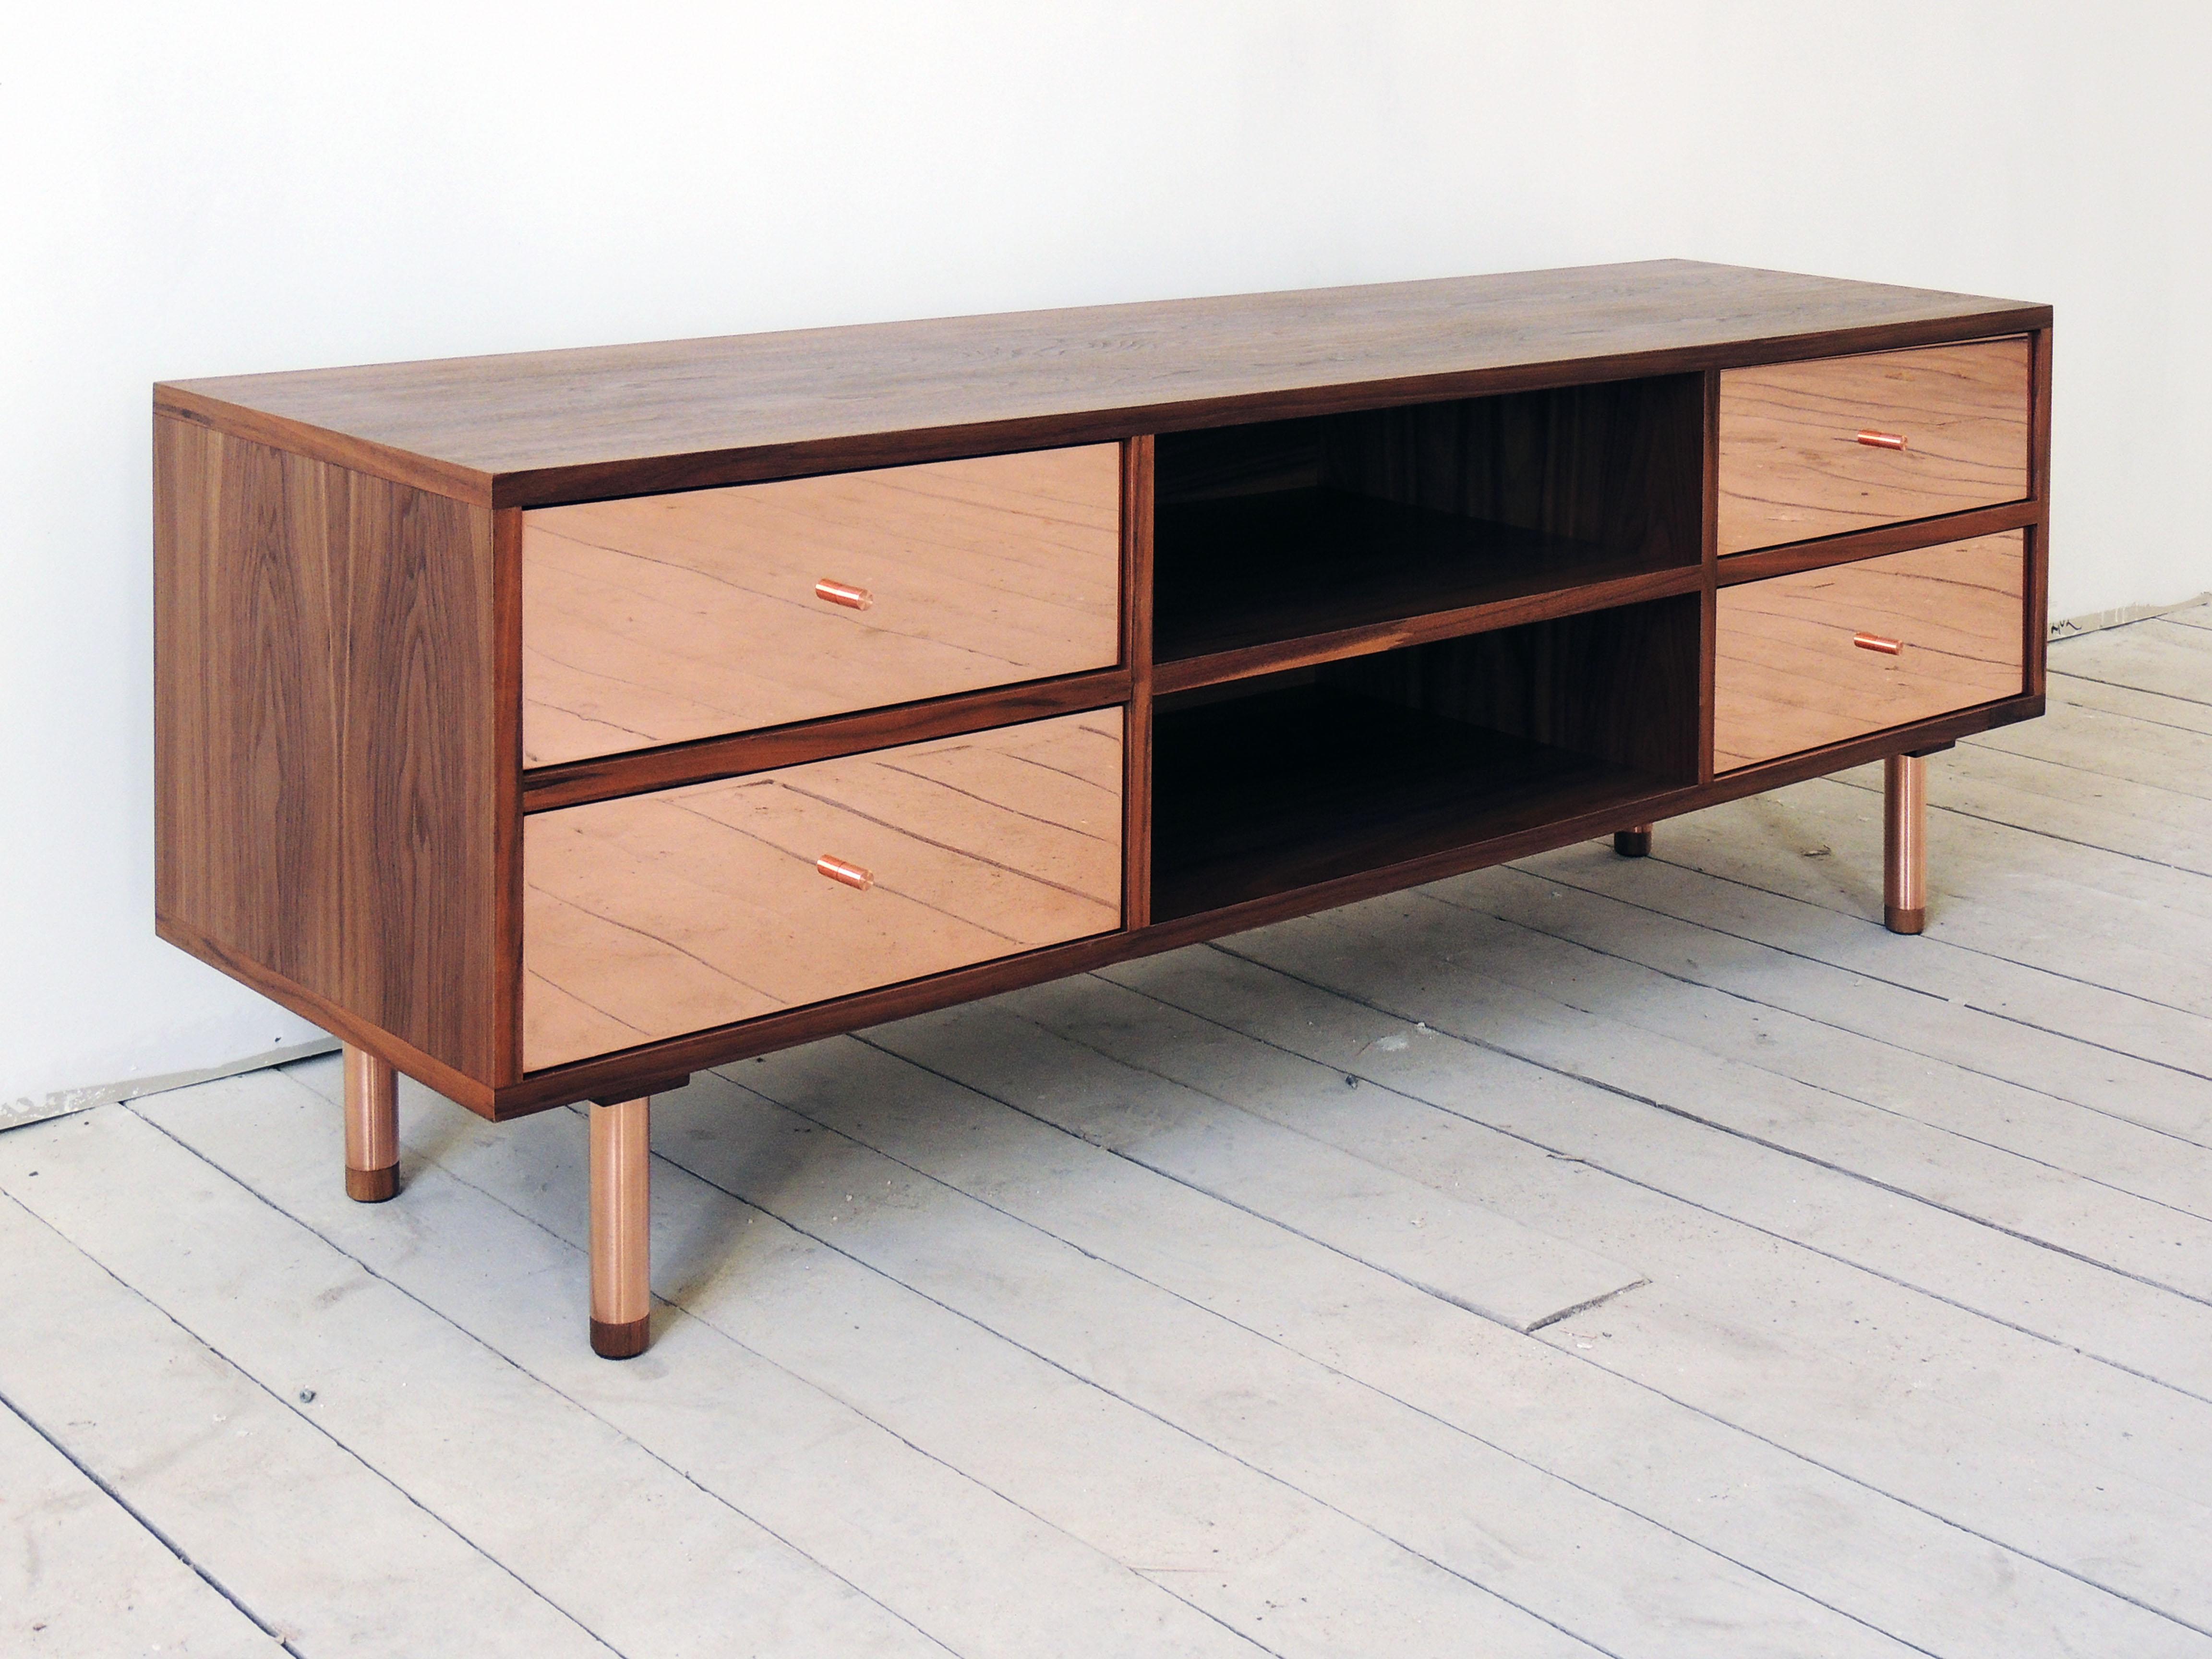 The high end modern media console Brooklyn offers the ultimate in unmistakable midcentury style. Superbly executed by European master craftsmen this console is particularly outstanding in its Minimalist style. Beautifully crafted with a fine walnut